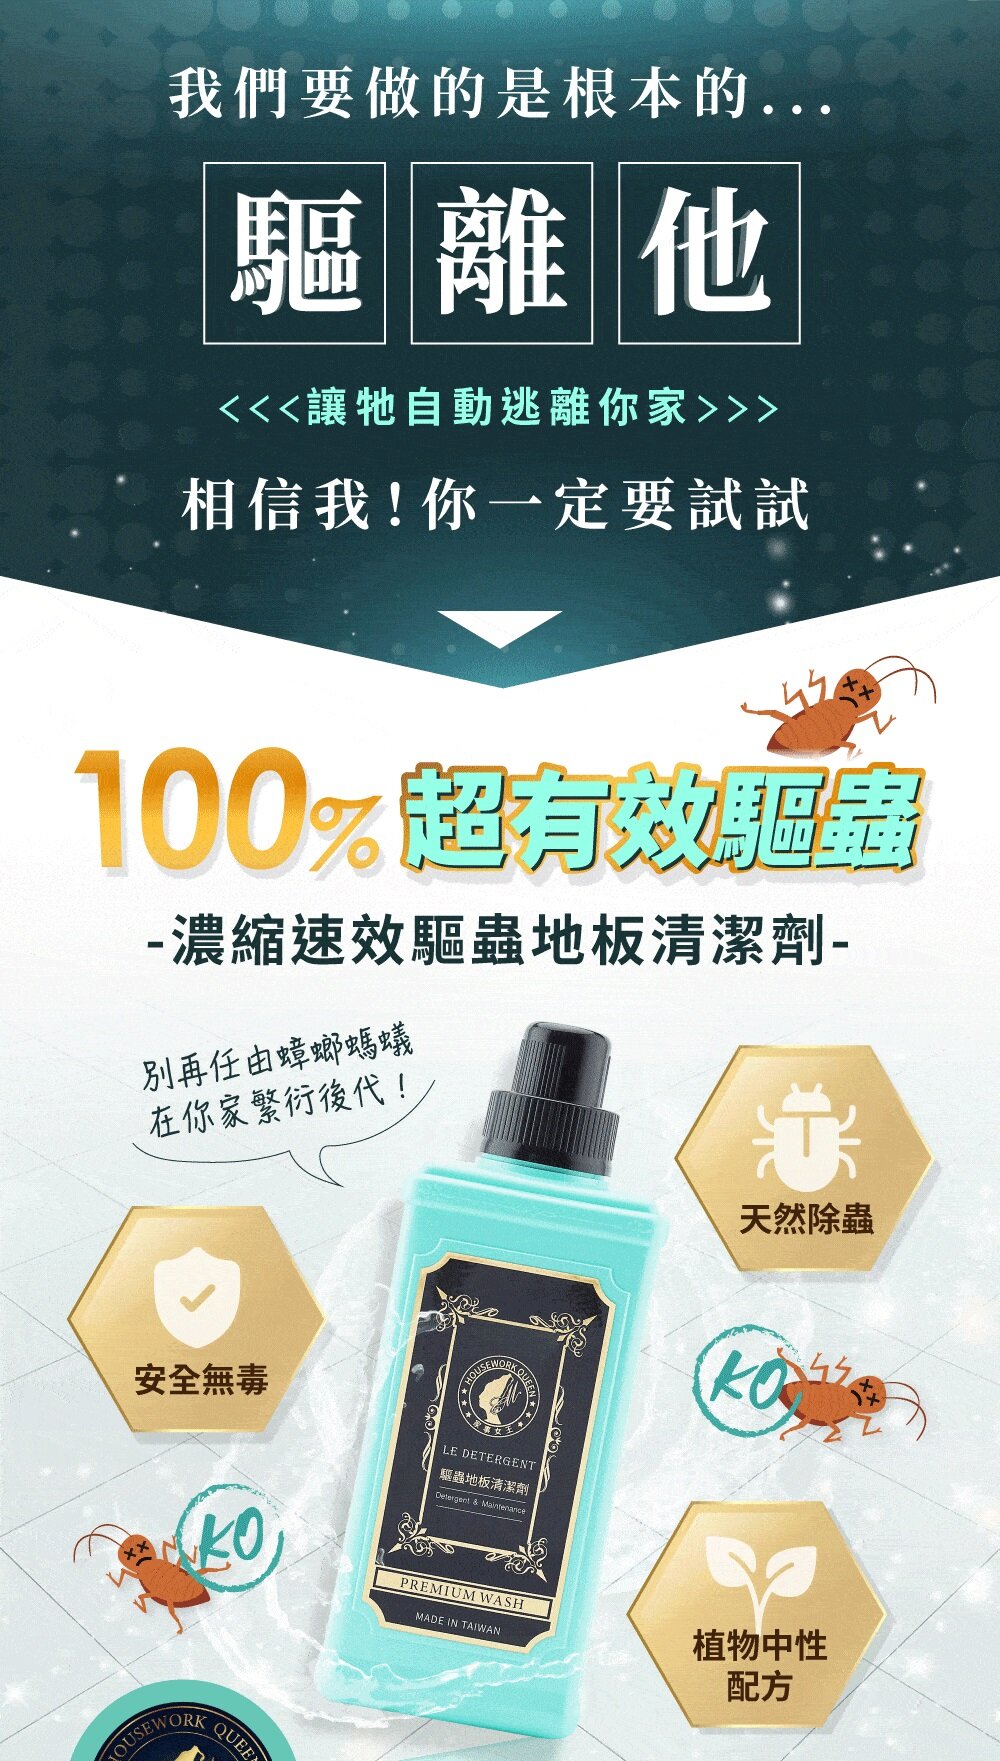 Queen of Housework [Authorized Original Product] - Taiwanese Plant Extract Insect Repellent Floor Cleaner (1,000ml)